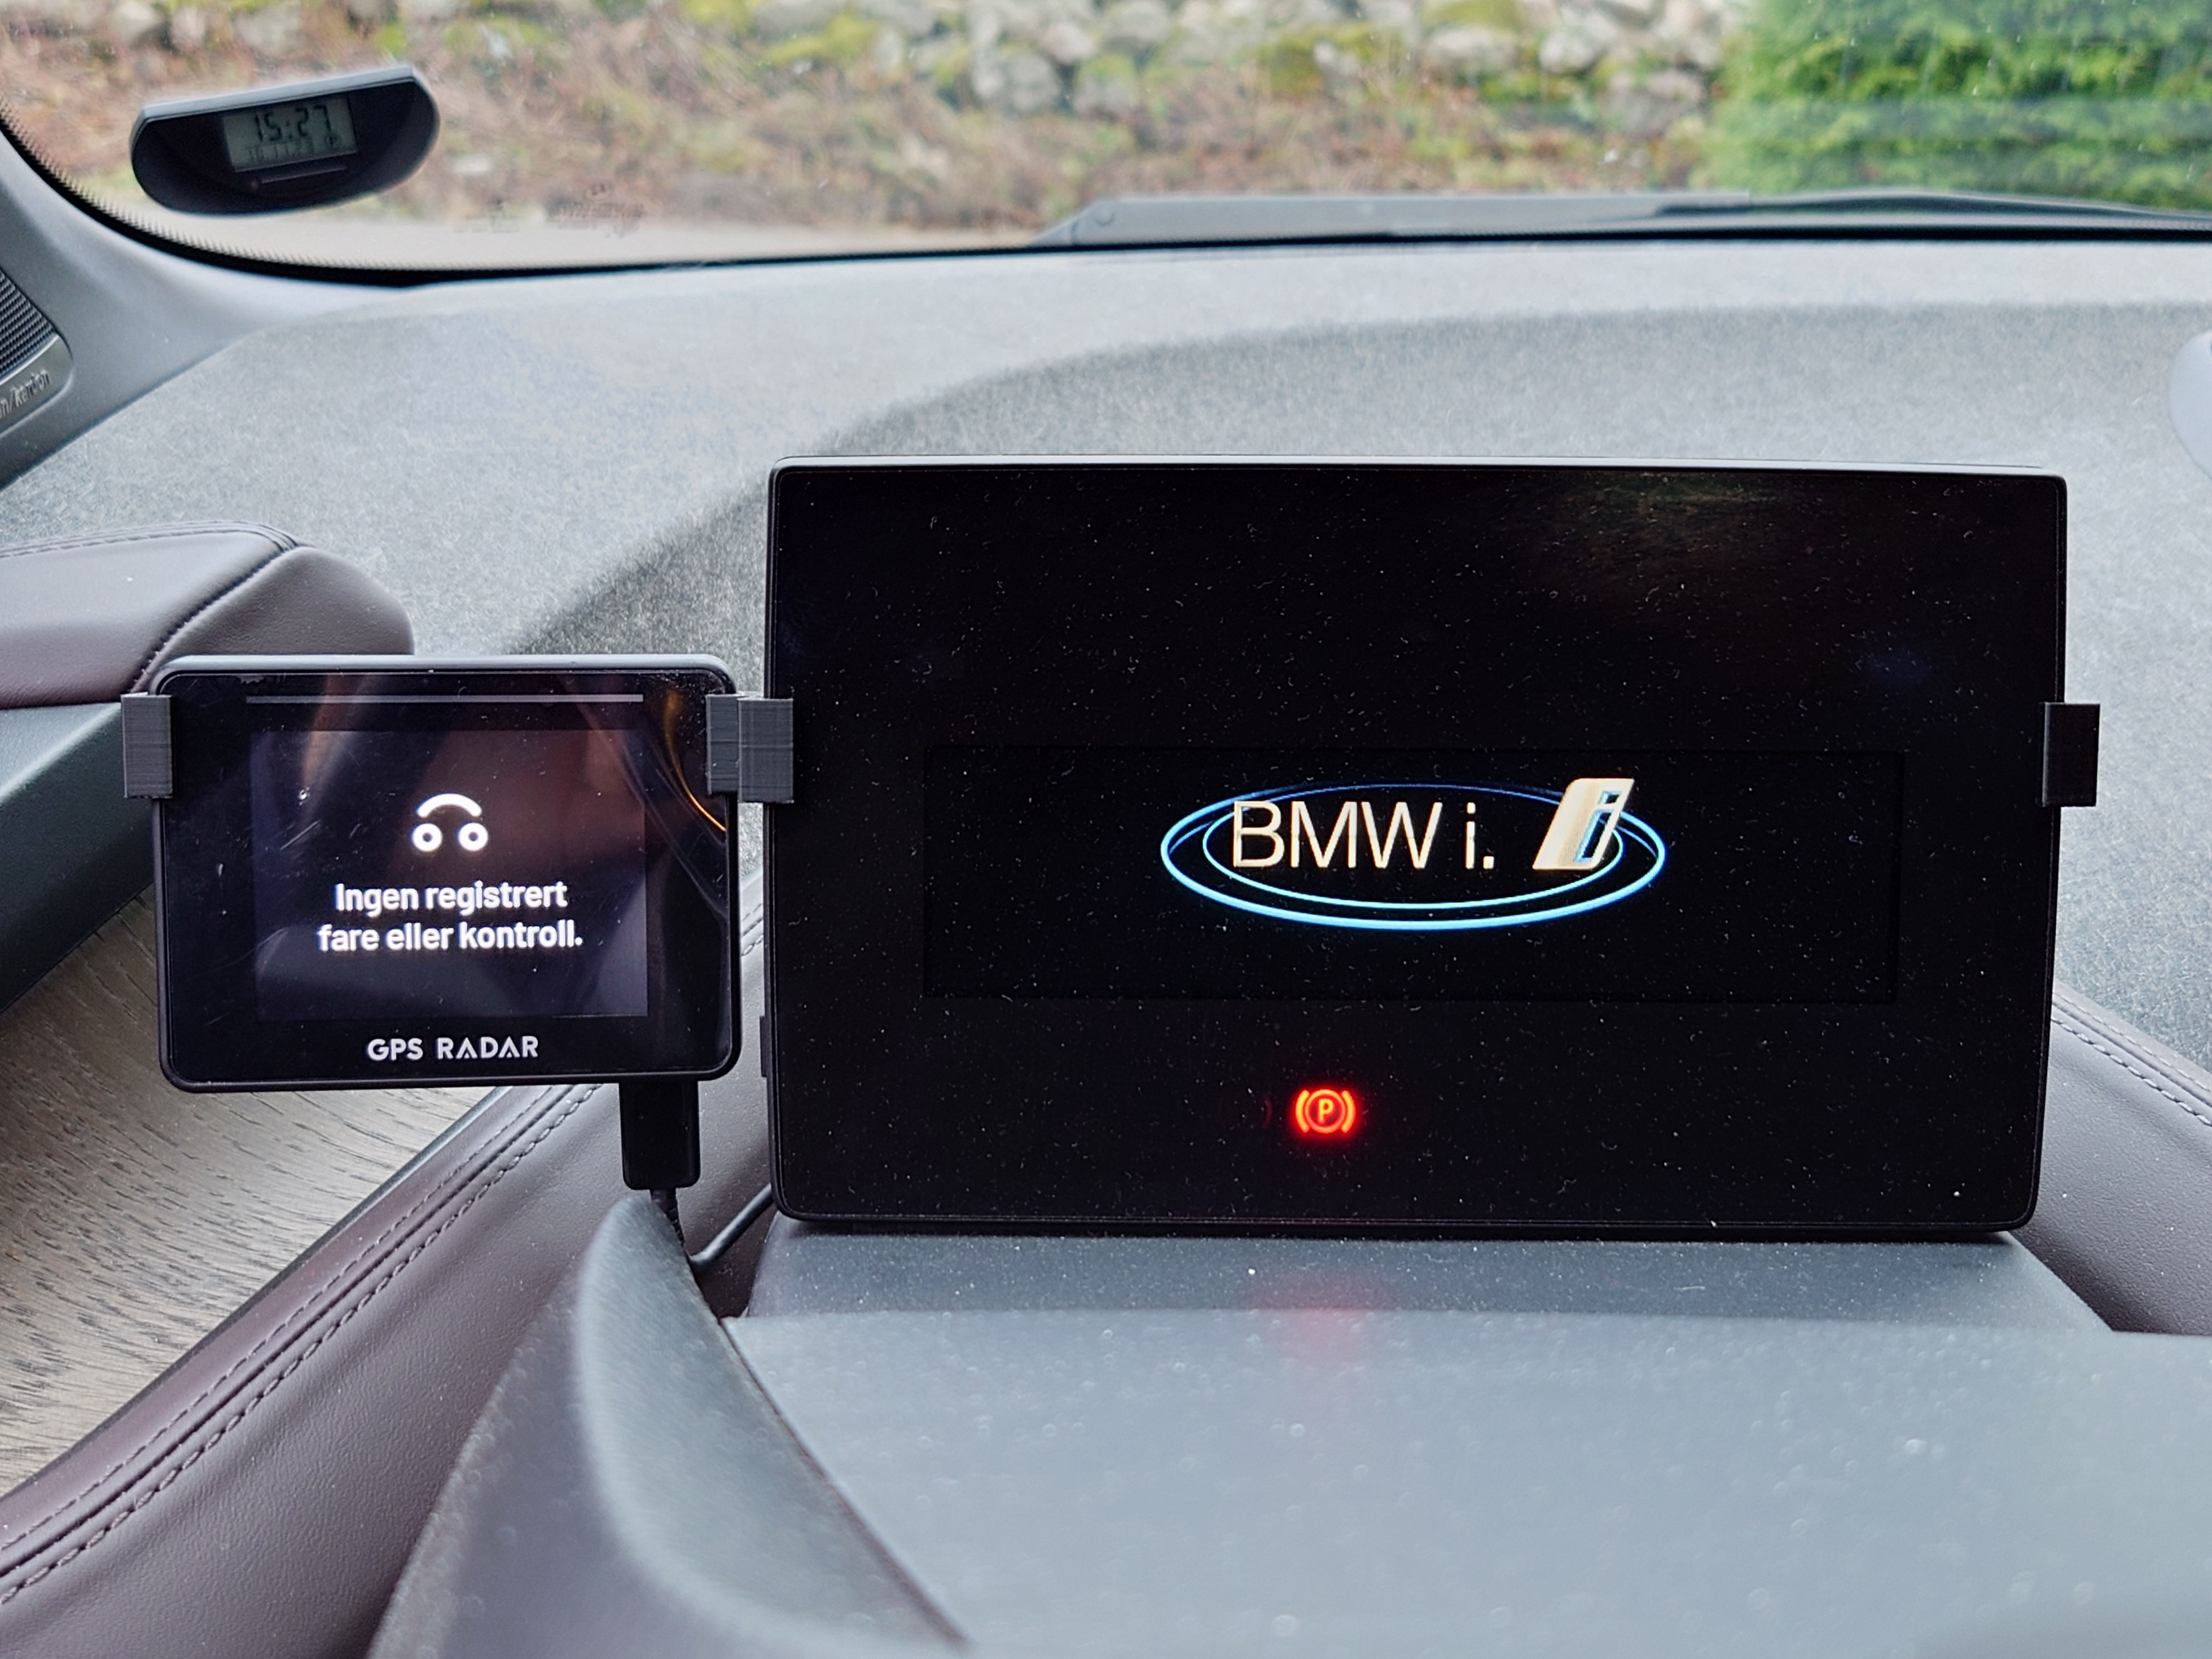 How to set up a dashcam in the BMW i3